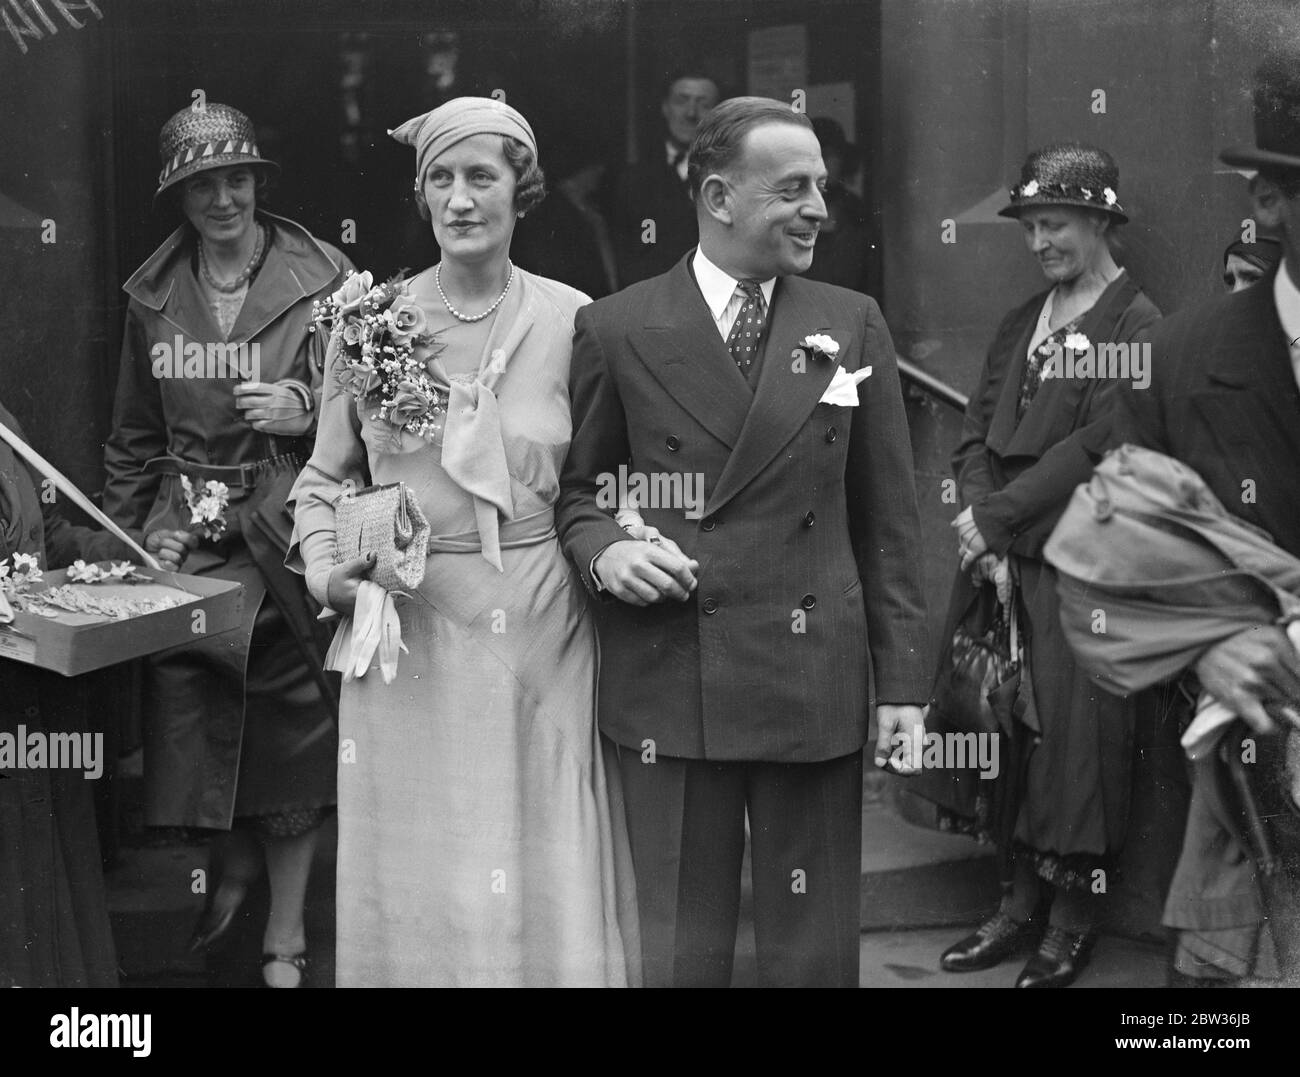 Daughter of Lord Ruthven weds . The wedding of Miss Jean Hore - Ruthven , daughter of Lord Ruthven , Lieutenant Governor of Guernsey to Don Francisco Larios took place at St Mary ' s Church , Cadogan Square , London . Photo show ; the bride and groom leaving the church after the ceremony . 21 June 1933 Stock Photo